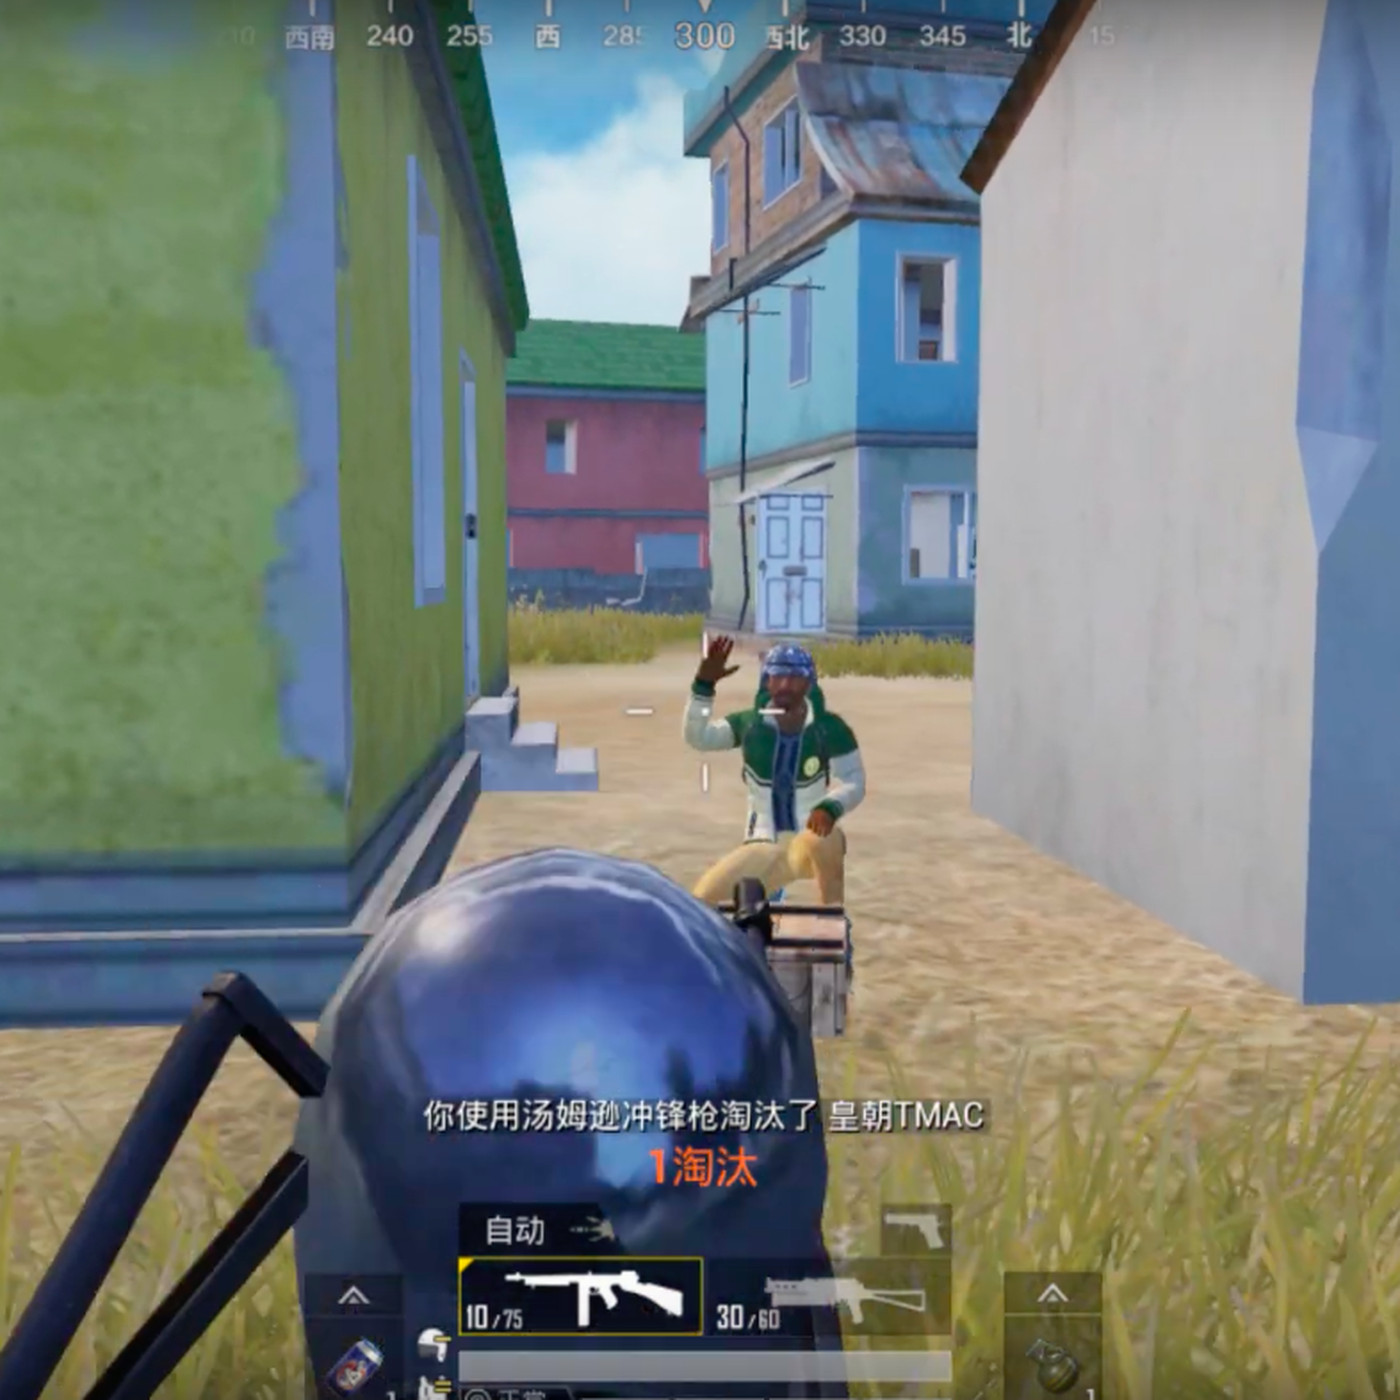 China's PUBG replacement makes people wave goodbye after they die - Polygon